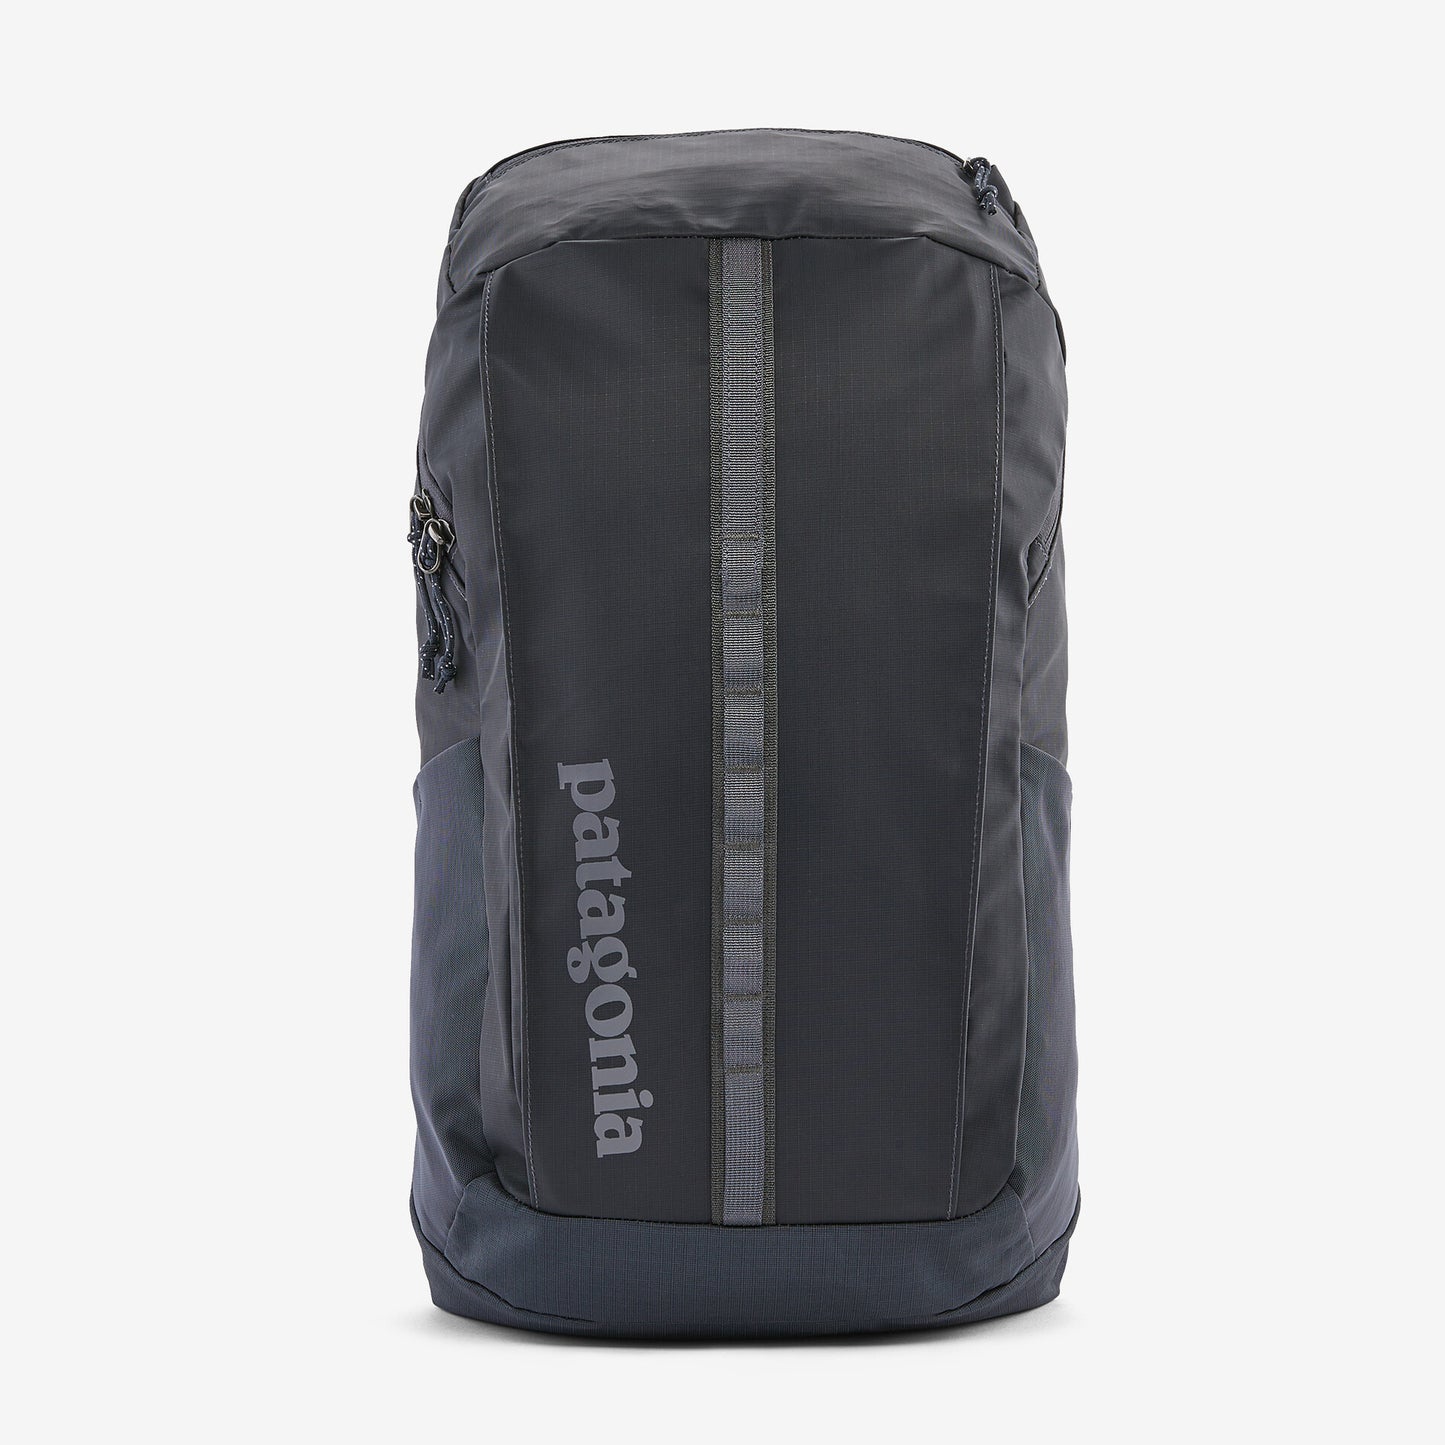 Load image into Gallery viewer, Patagonia Black Hole Pack 25L Backpack
